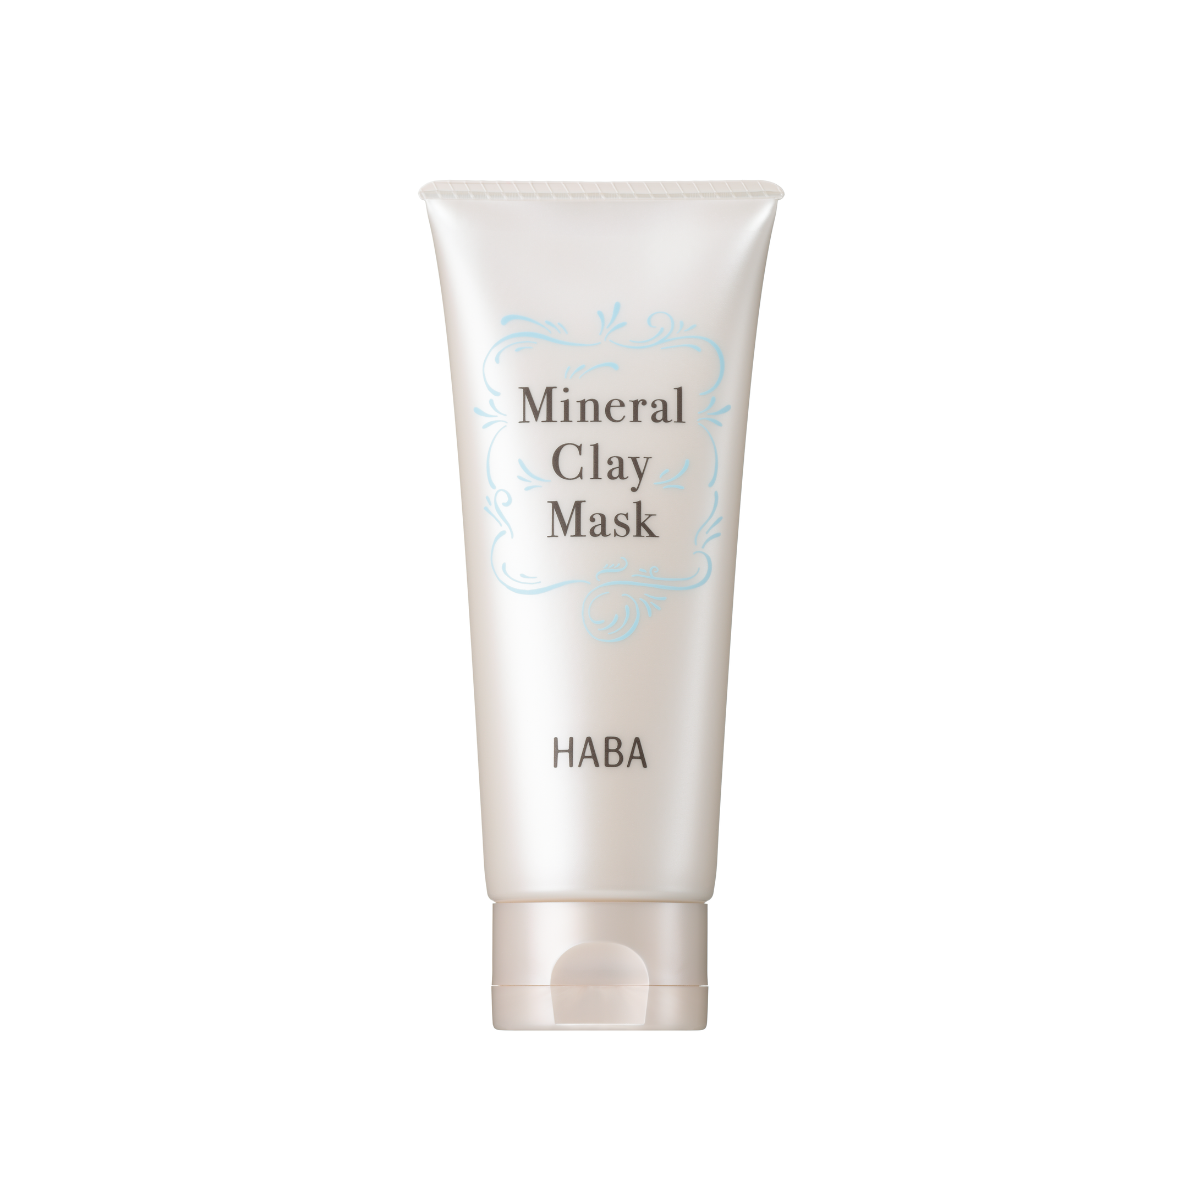 008981 MINERAL CLAY MASK 120G